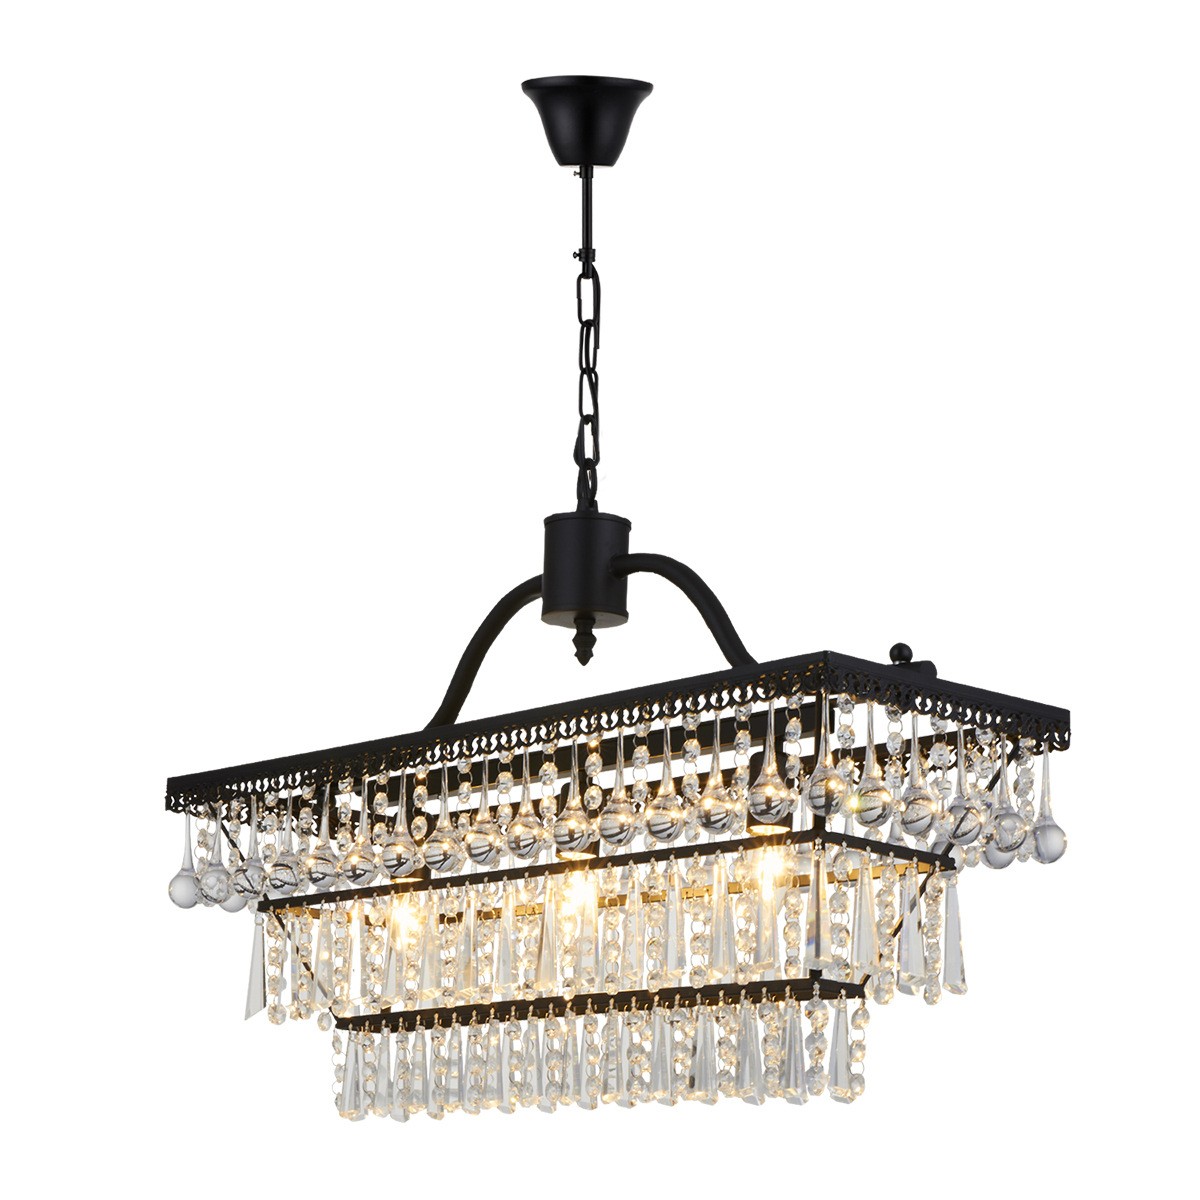 Classic Crystal Metal Chandelier For, Rectangular Metal And Glass 3 Light Chandelier